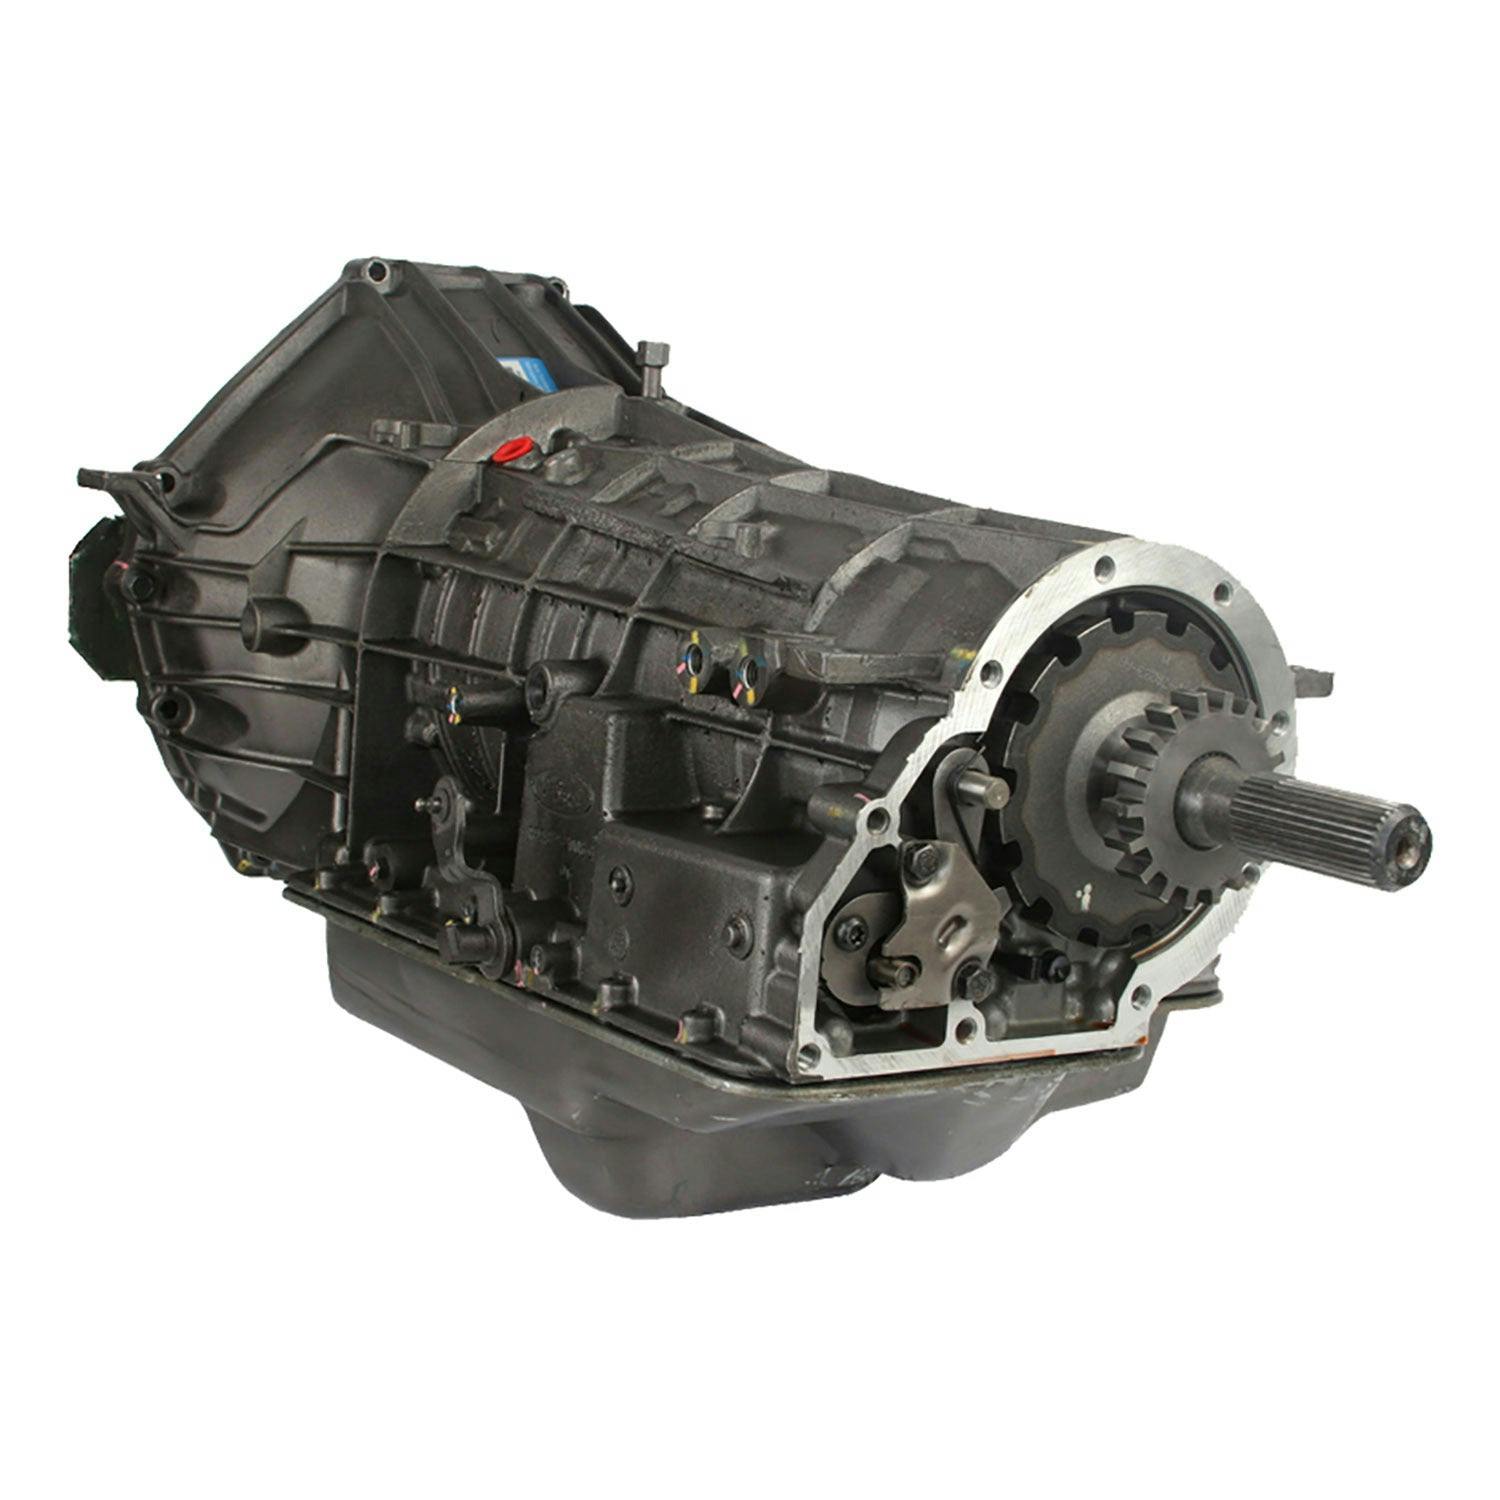 Automatic Transmission for 1998 Ford E-150, 250, 350 Econoline/E-150, 350 Econoline Club Wagon/Expedition/F-150 and Lincoln Navigator RWD with 5.4L V8 Engine